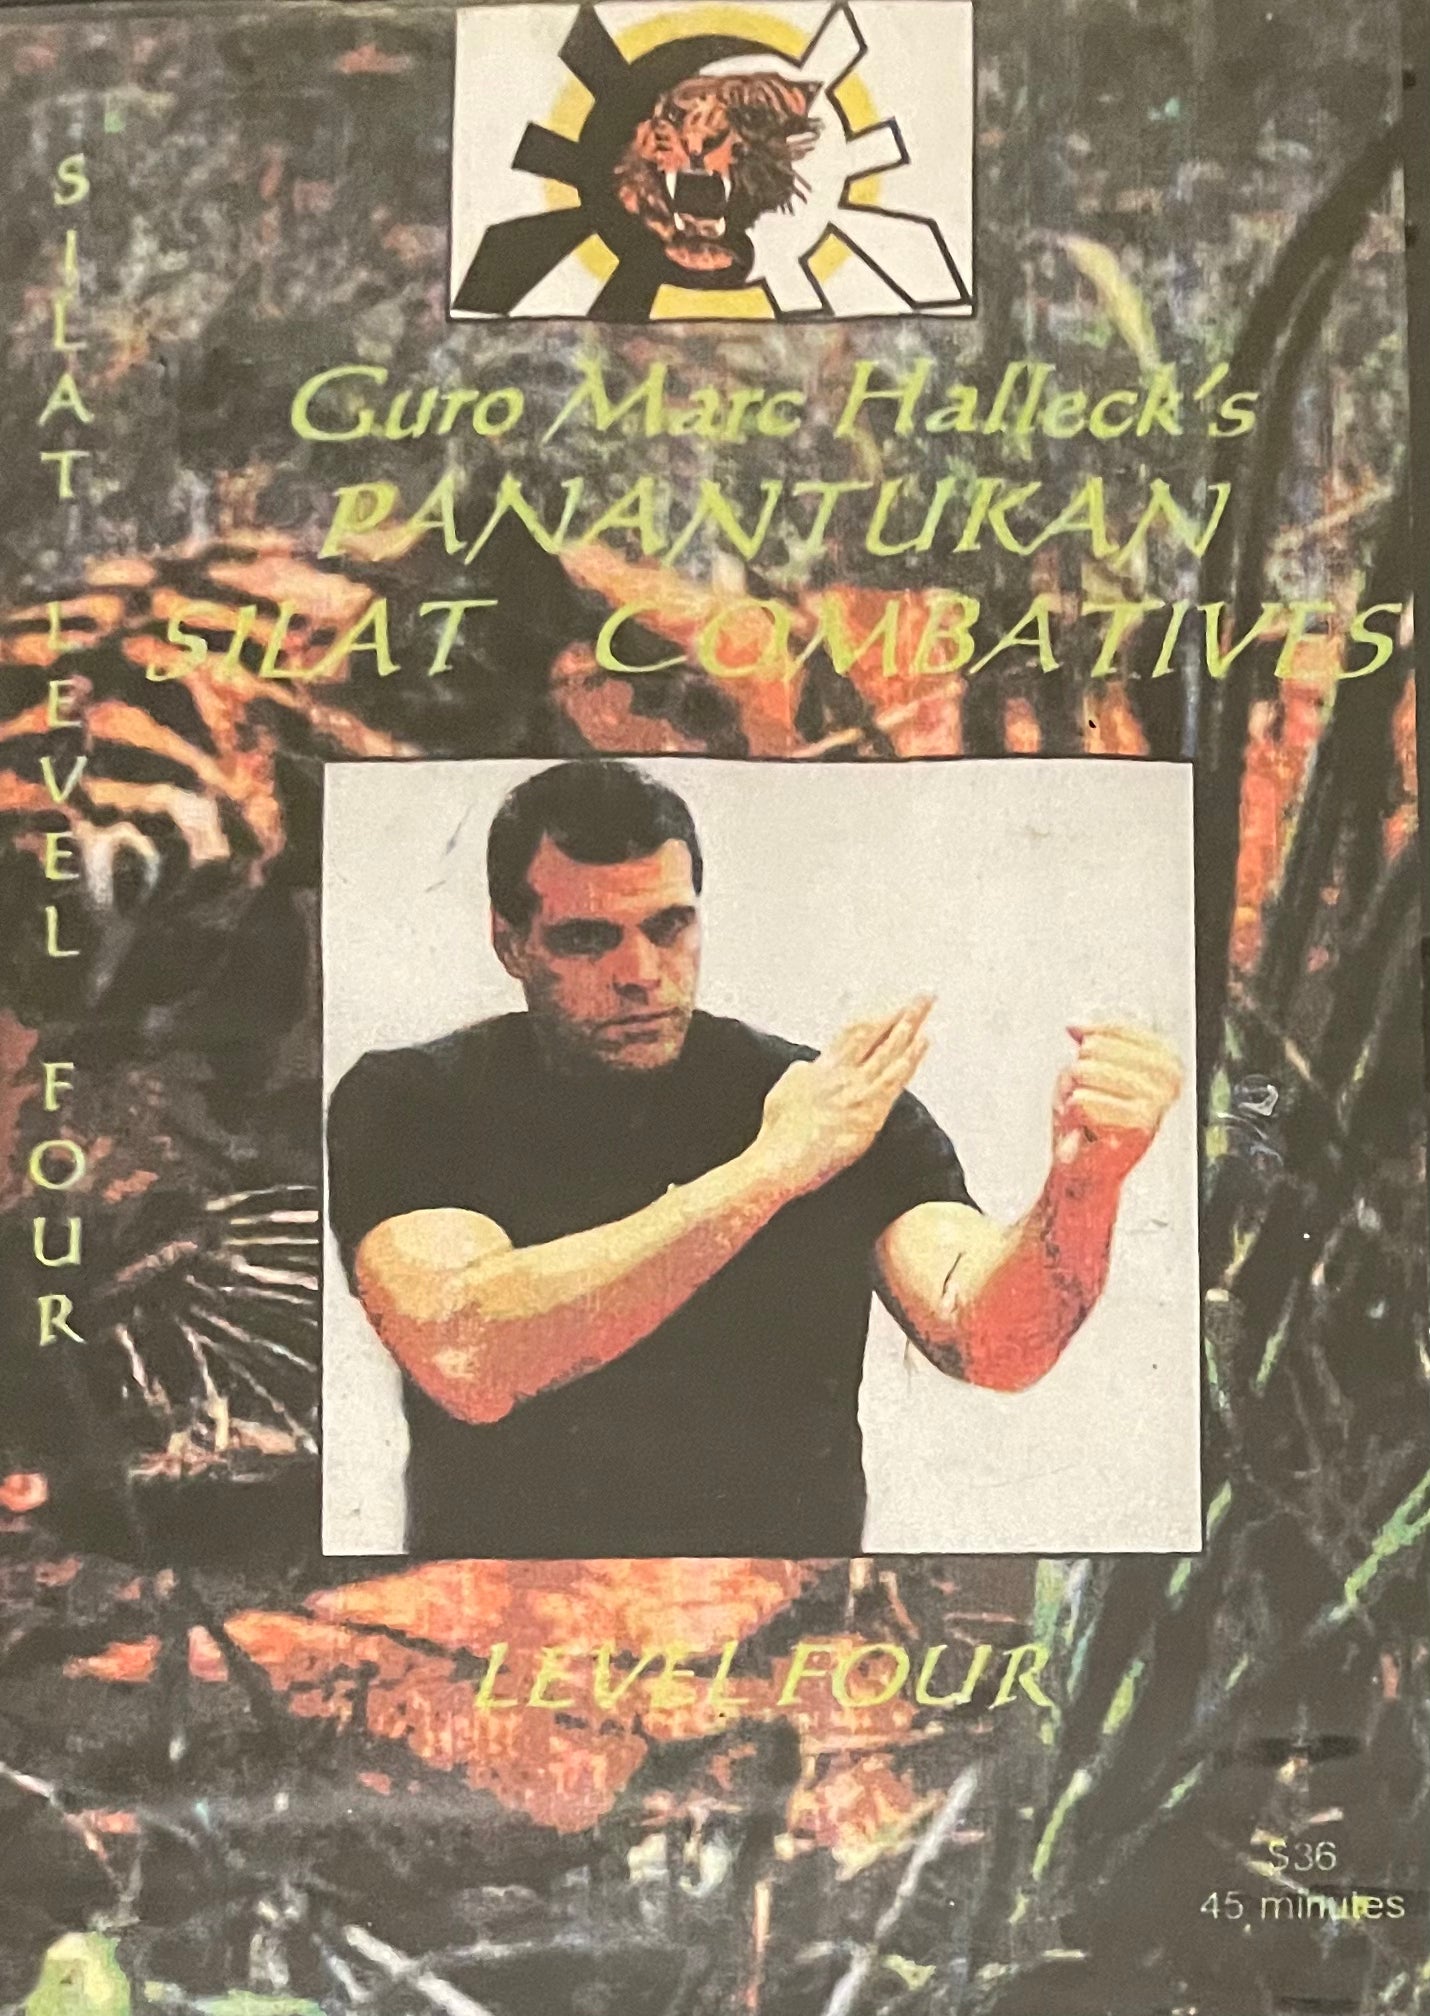 Panantukan Silat Combatives Level 4 DVD by Marc Halleck (Preowned)